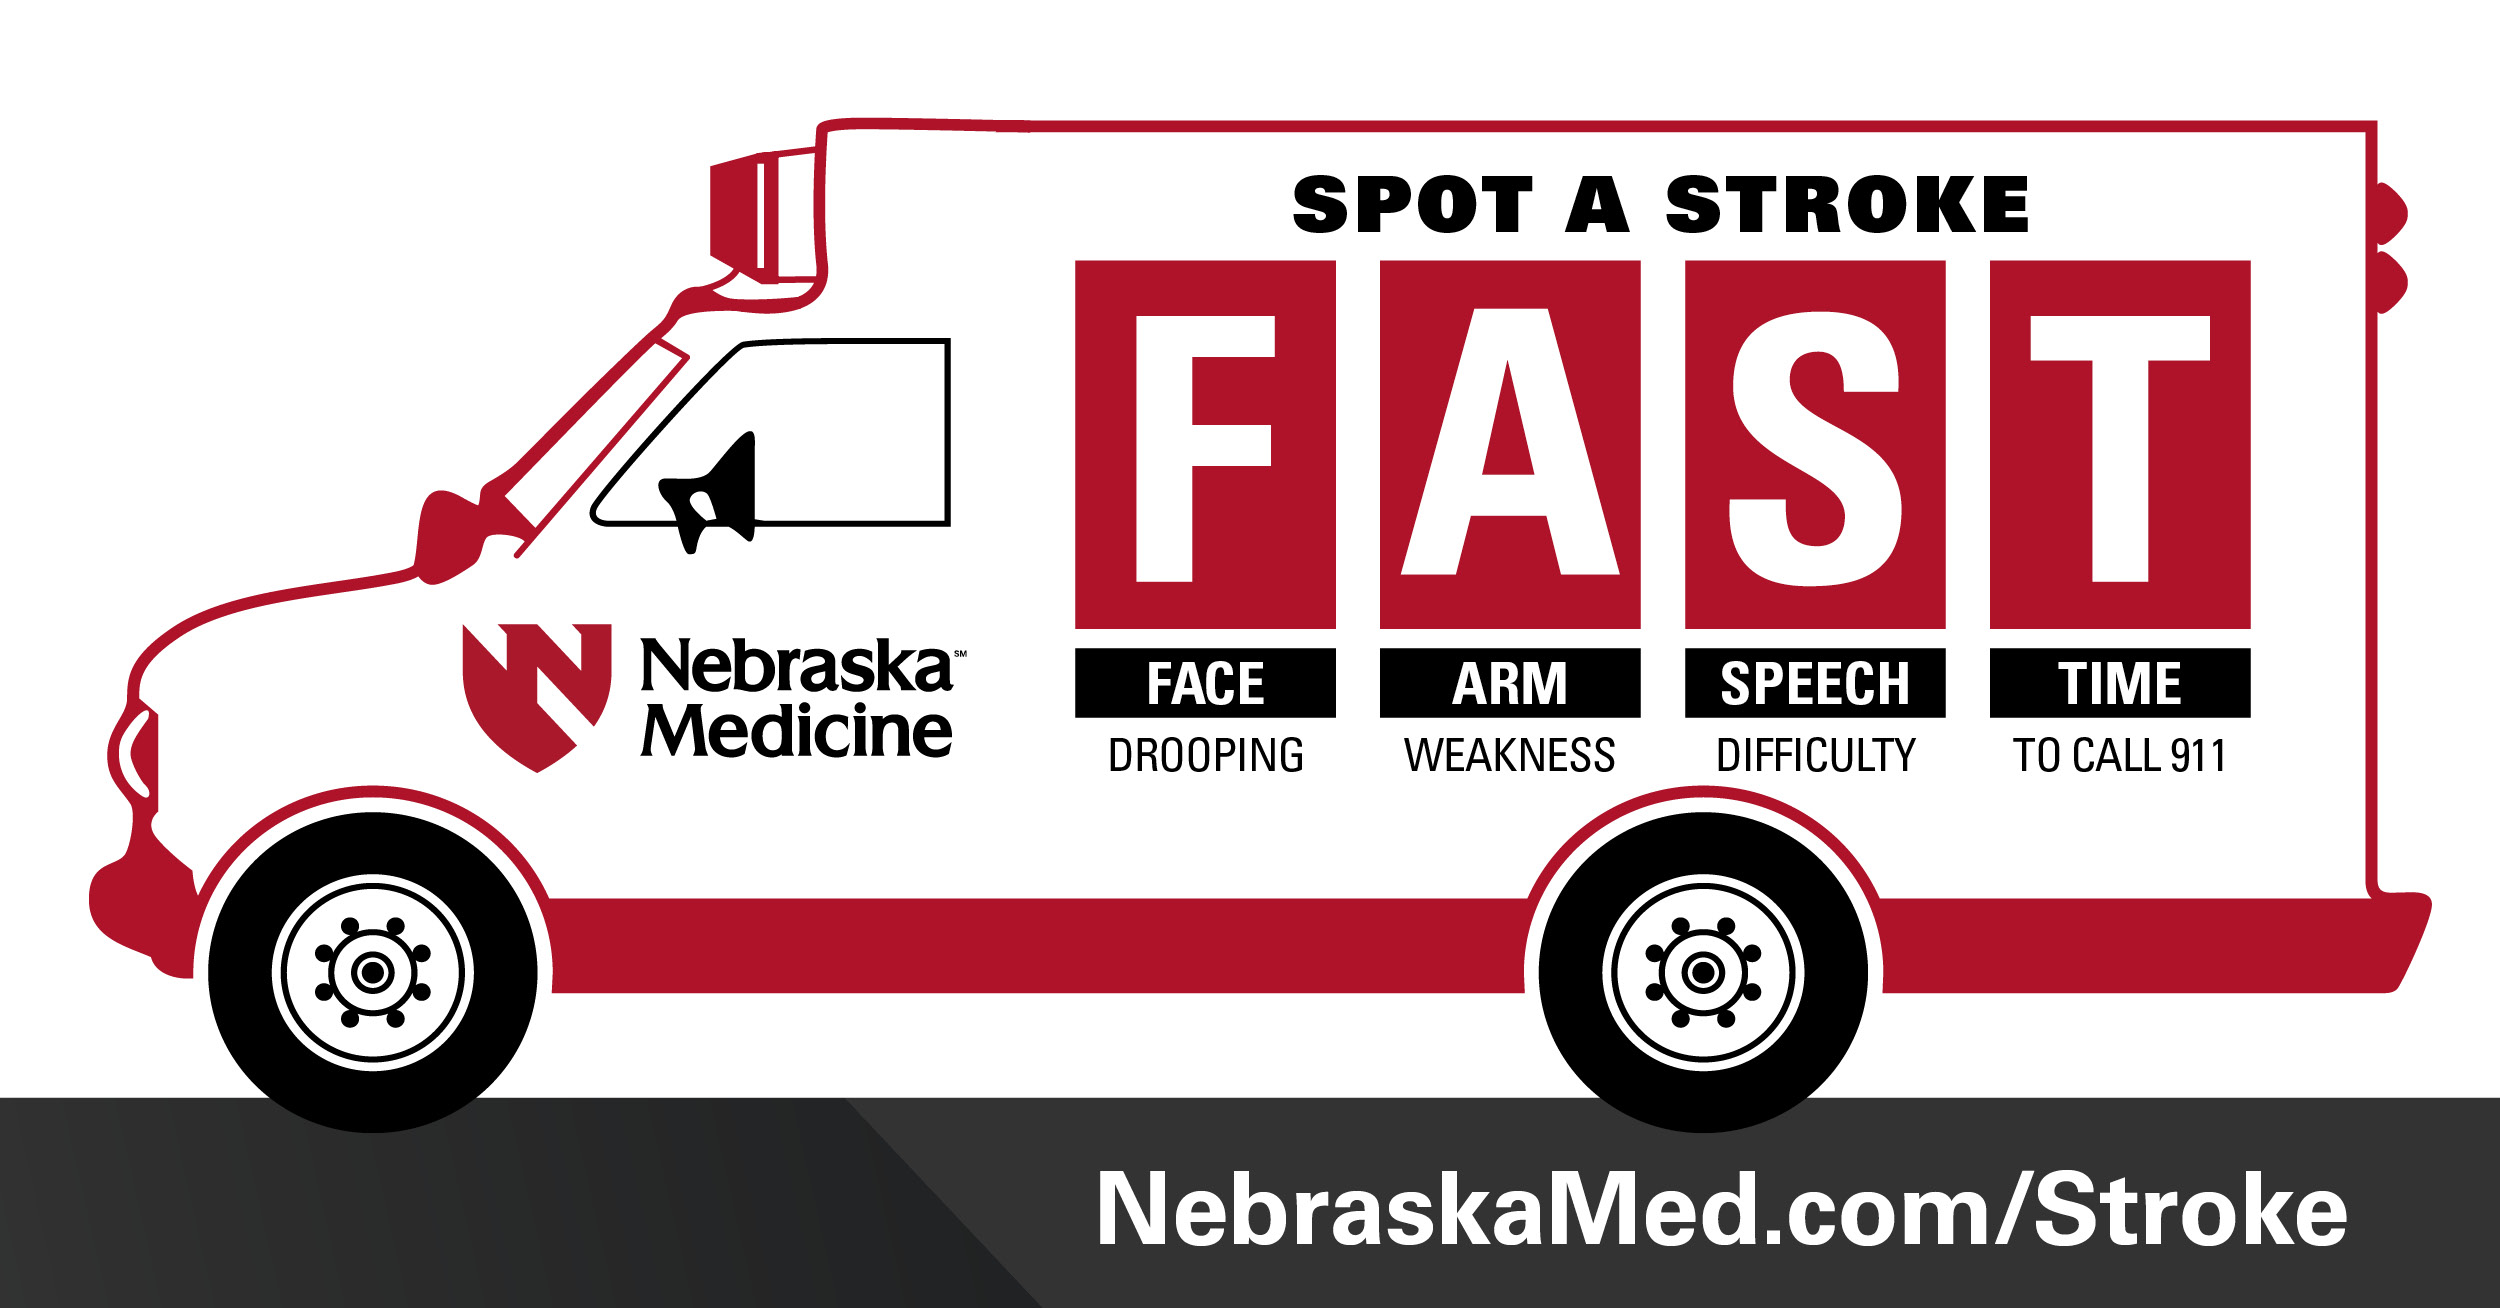 Spot a stroke FAST: F: Face Drooping; A: Arm Weakness; S: Speech Difficulty; T: Time to call 911. 